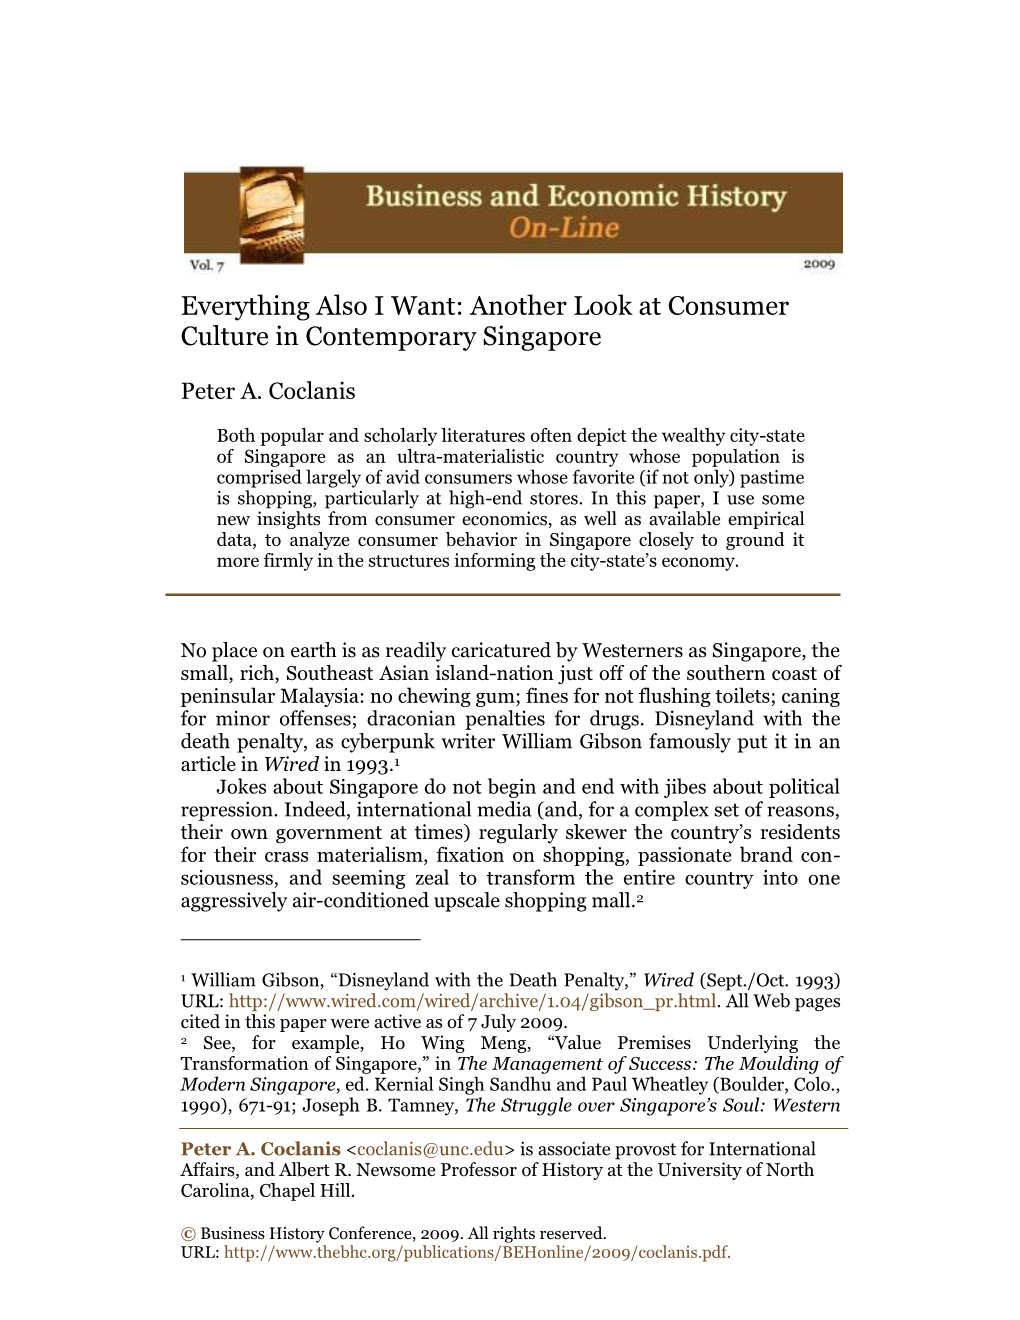 Another Look at Consumer Culture in Contemporary Singapore